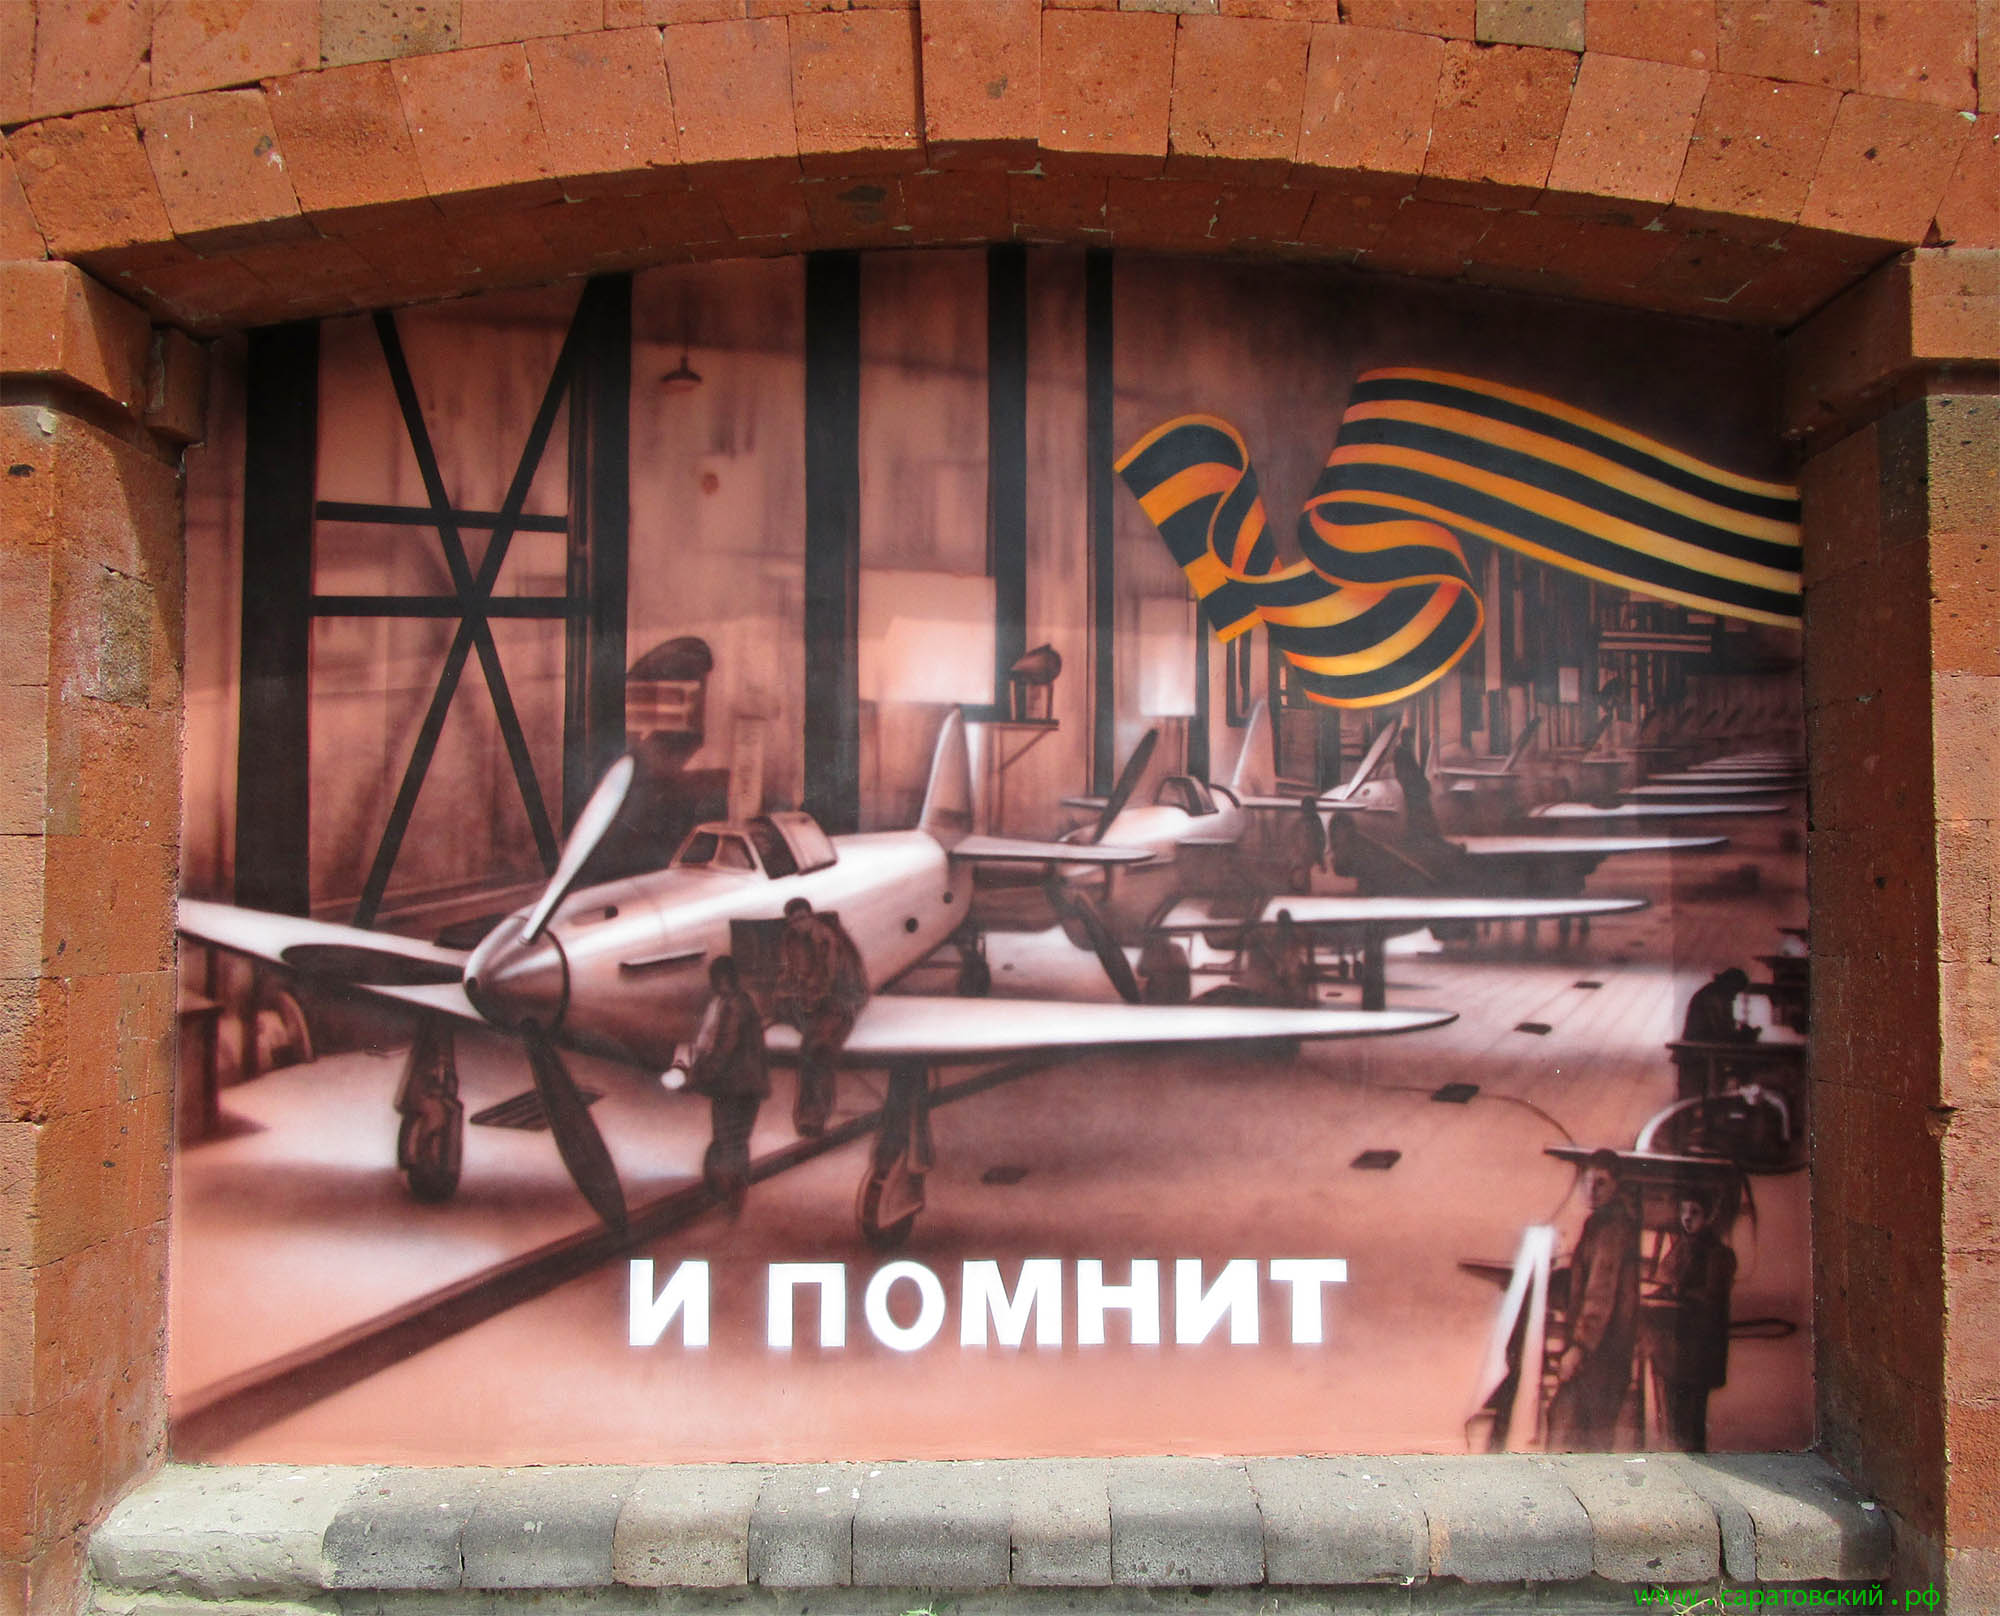 Saratov embankment graffiti: one of the workshops of Saratov Aircraft Plant during the Great Patriotic War of 1941-1945